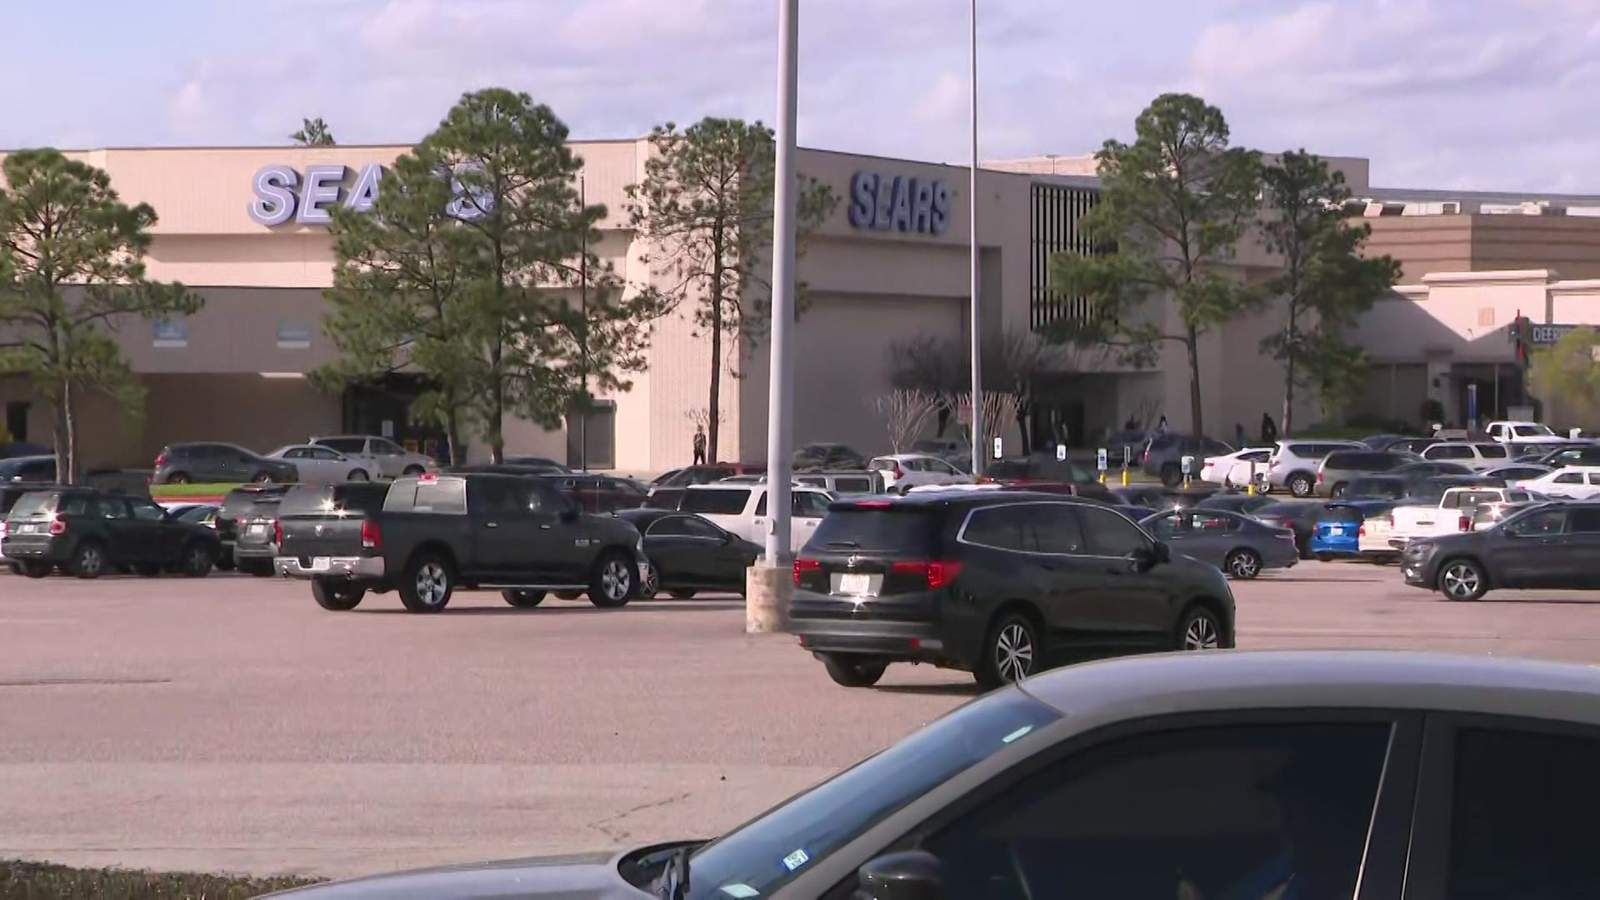 2 dead after an officer-involved shooting at Deerbrook Mall in Humble